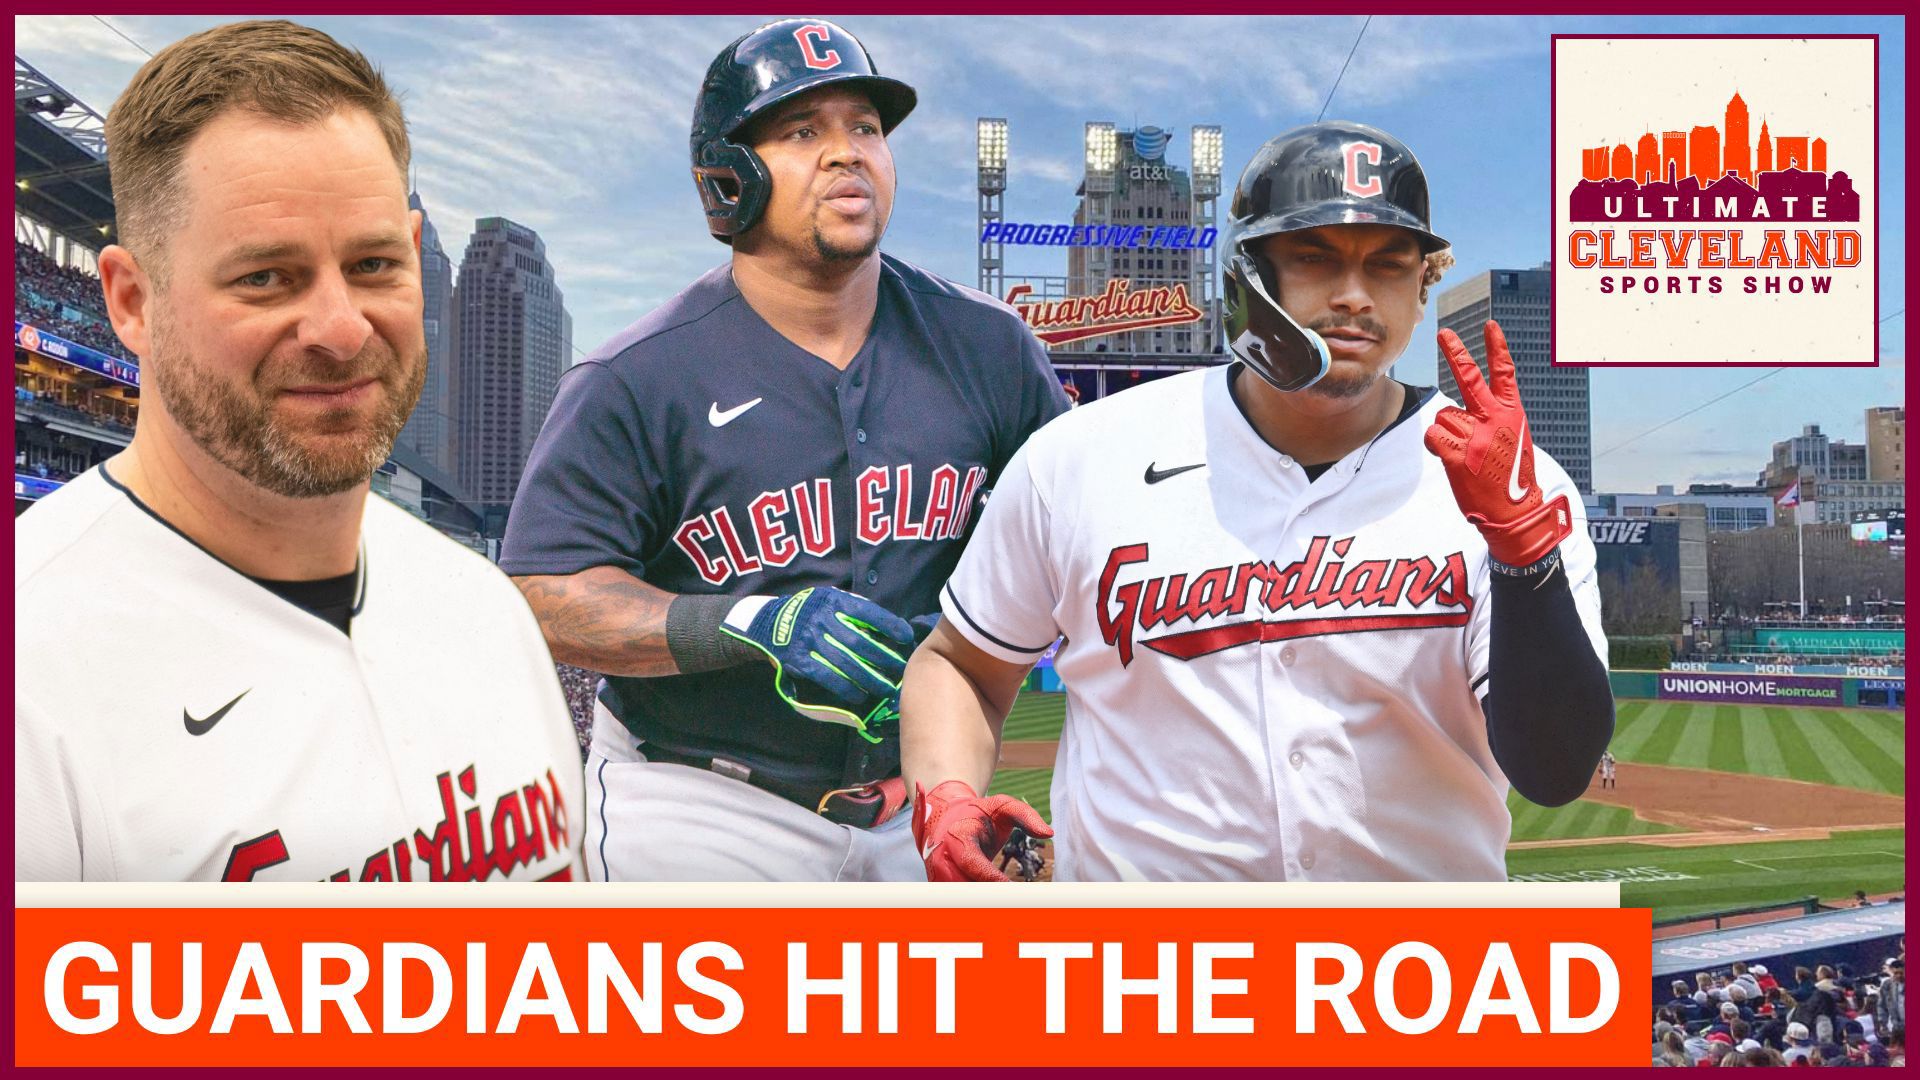 The Cleveland Guardians are red hot going into a six game road trip to take on the Los Angeles Angels and Colorado Rockies. Already on a six game win streak this sch